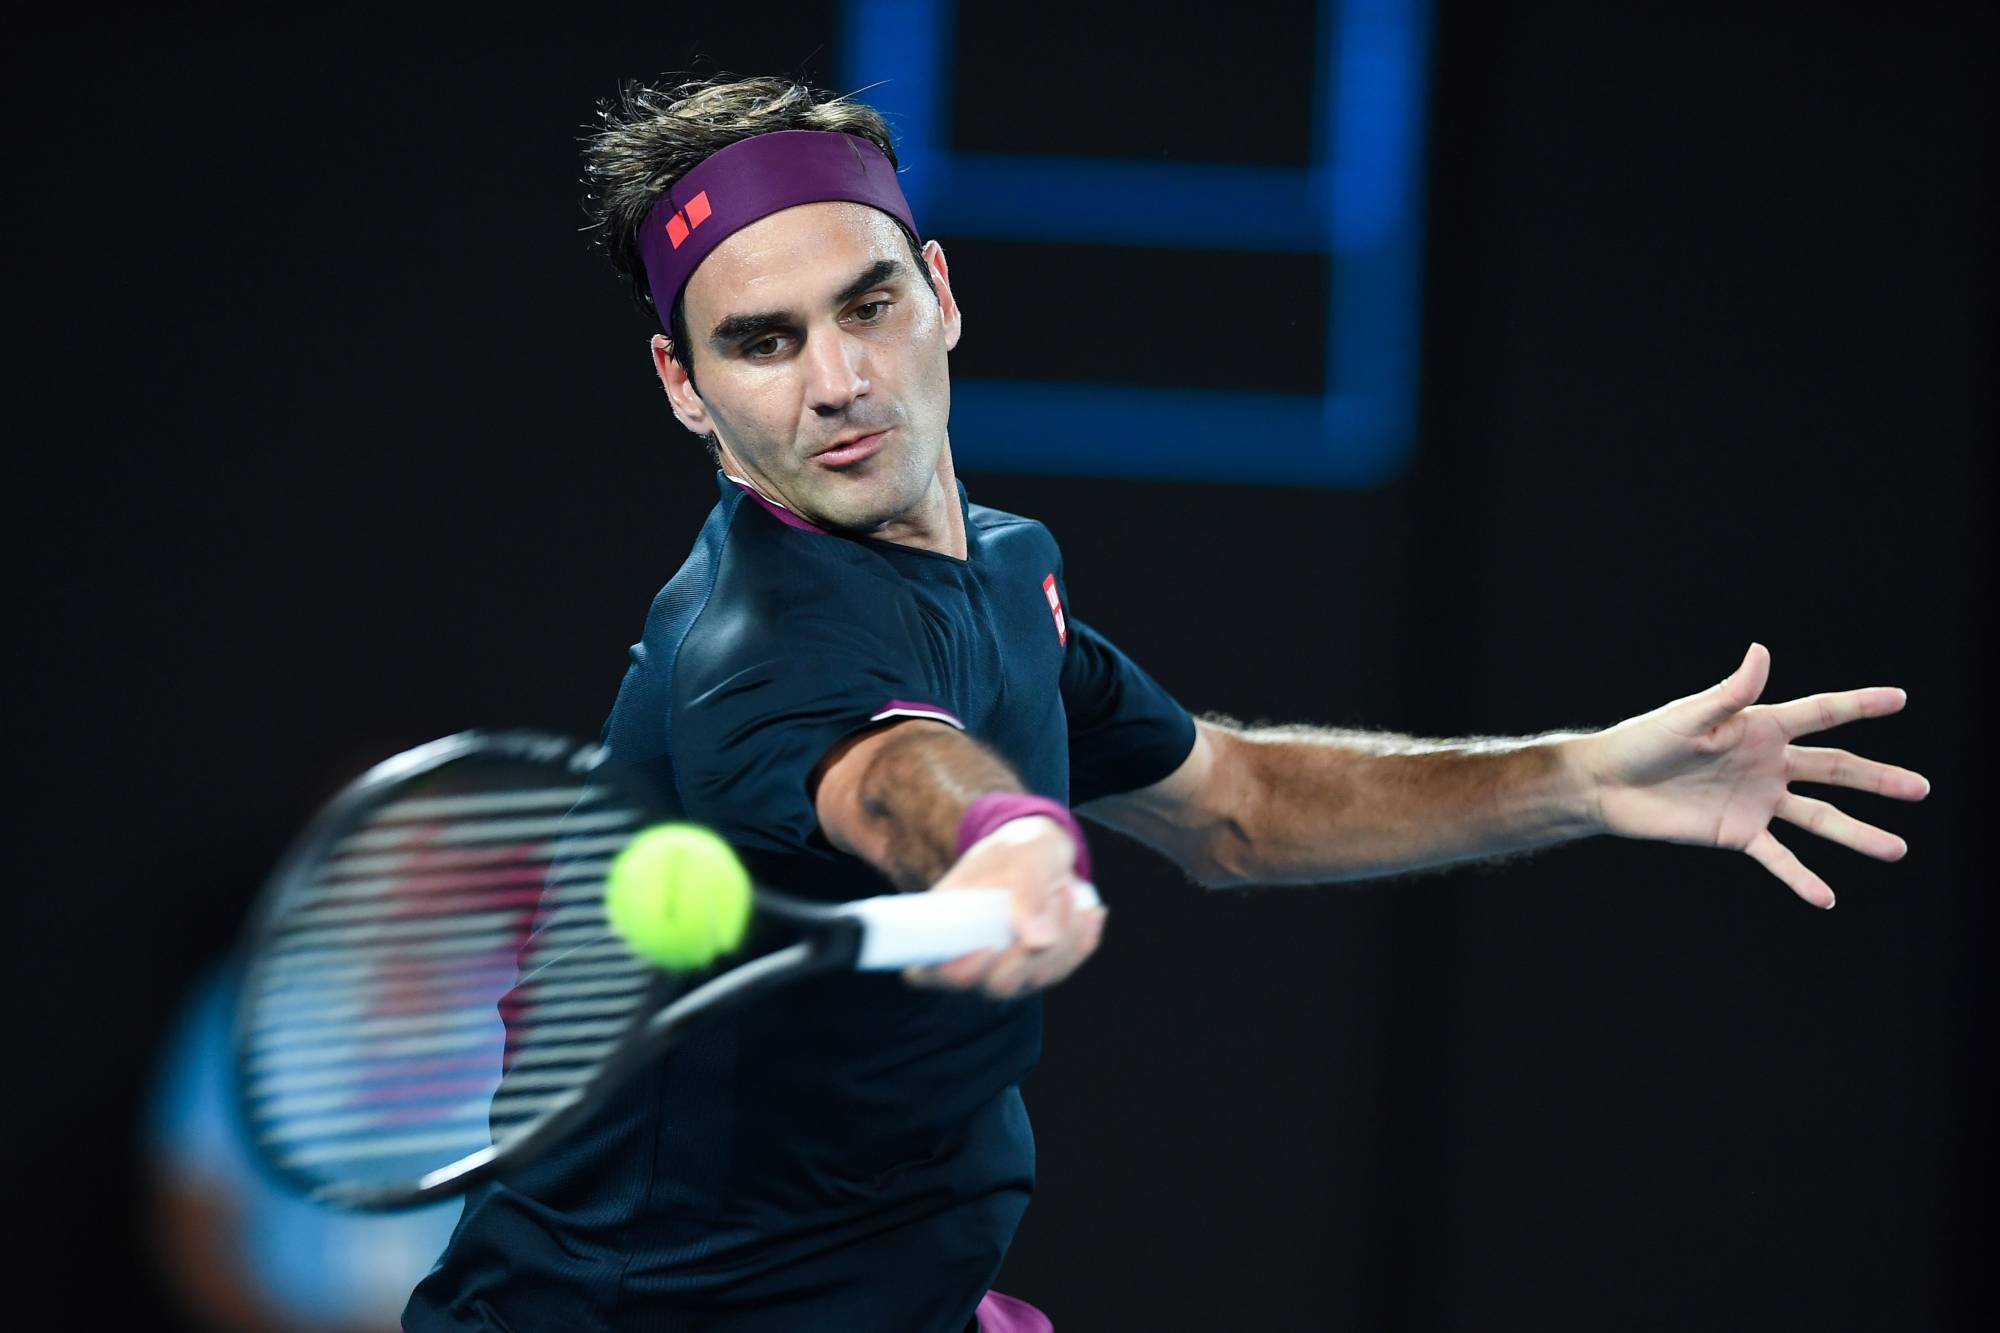 Officials expect Roger Federer and other top players for